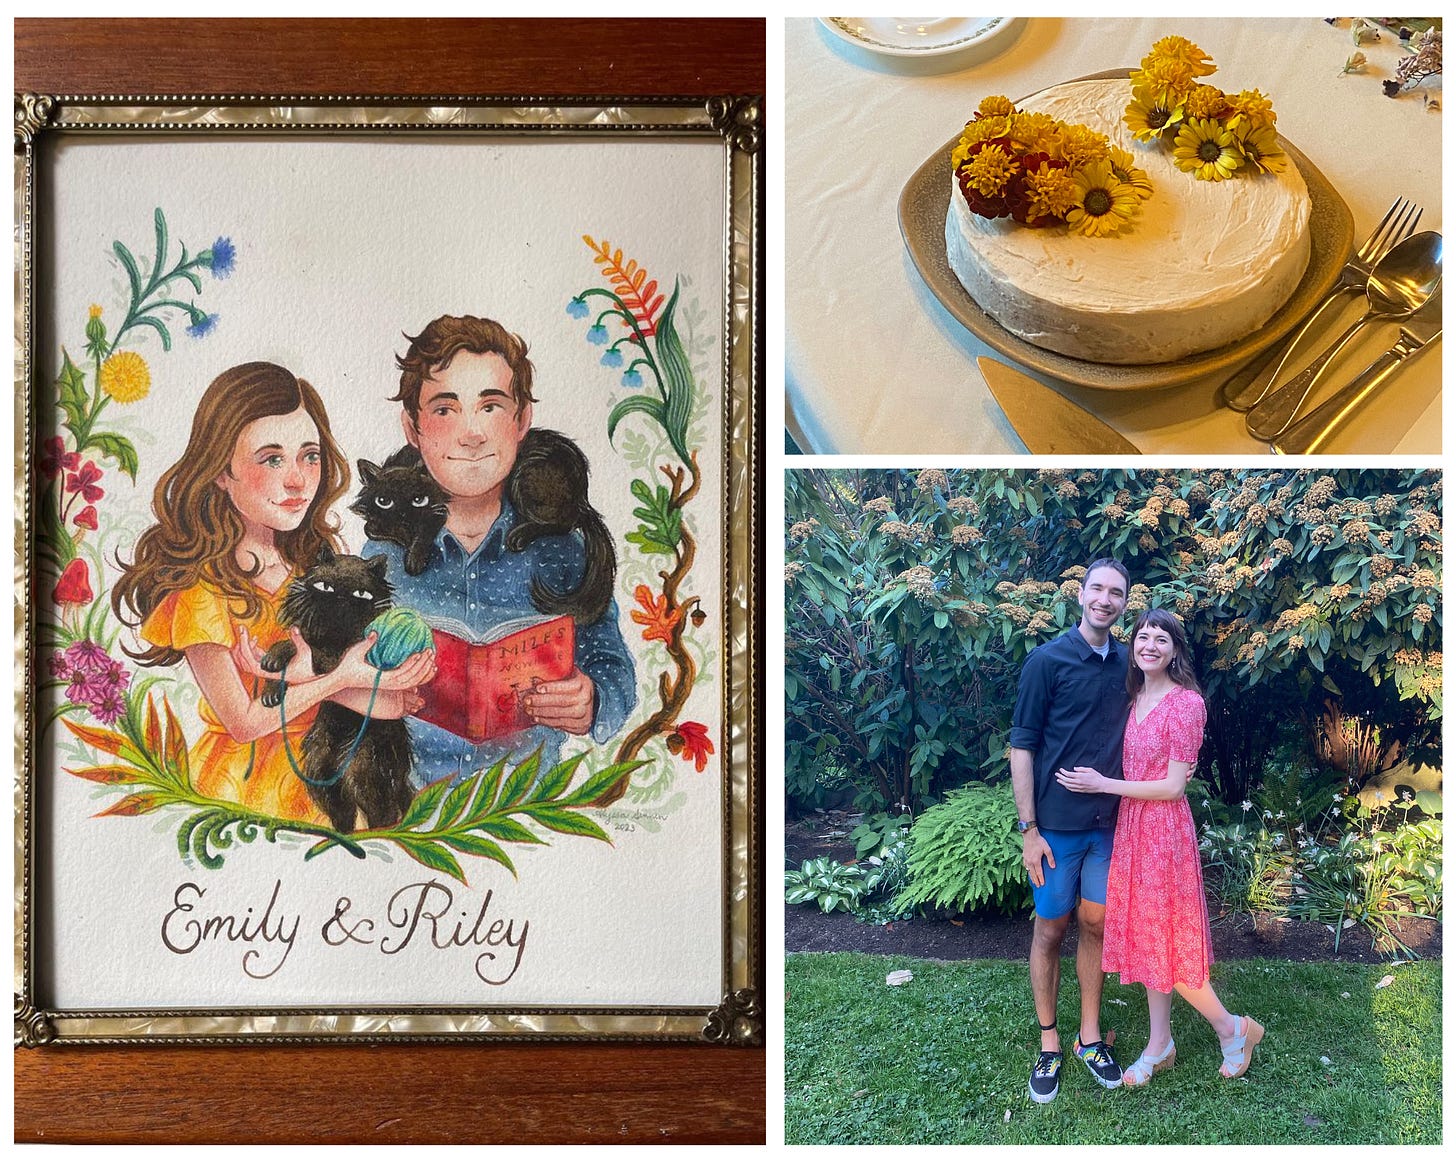 A photo collage of three images from Emily and Riley's wedding celebration, including a hand illustrated portrait of the married couple, a homemade wedding cake, and the illustrator and her partner.